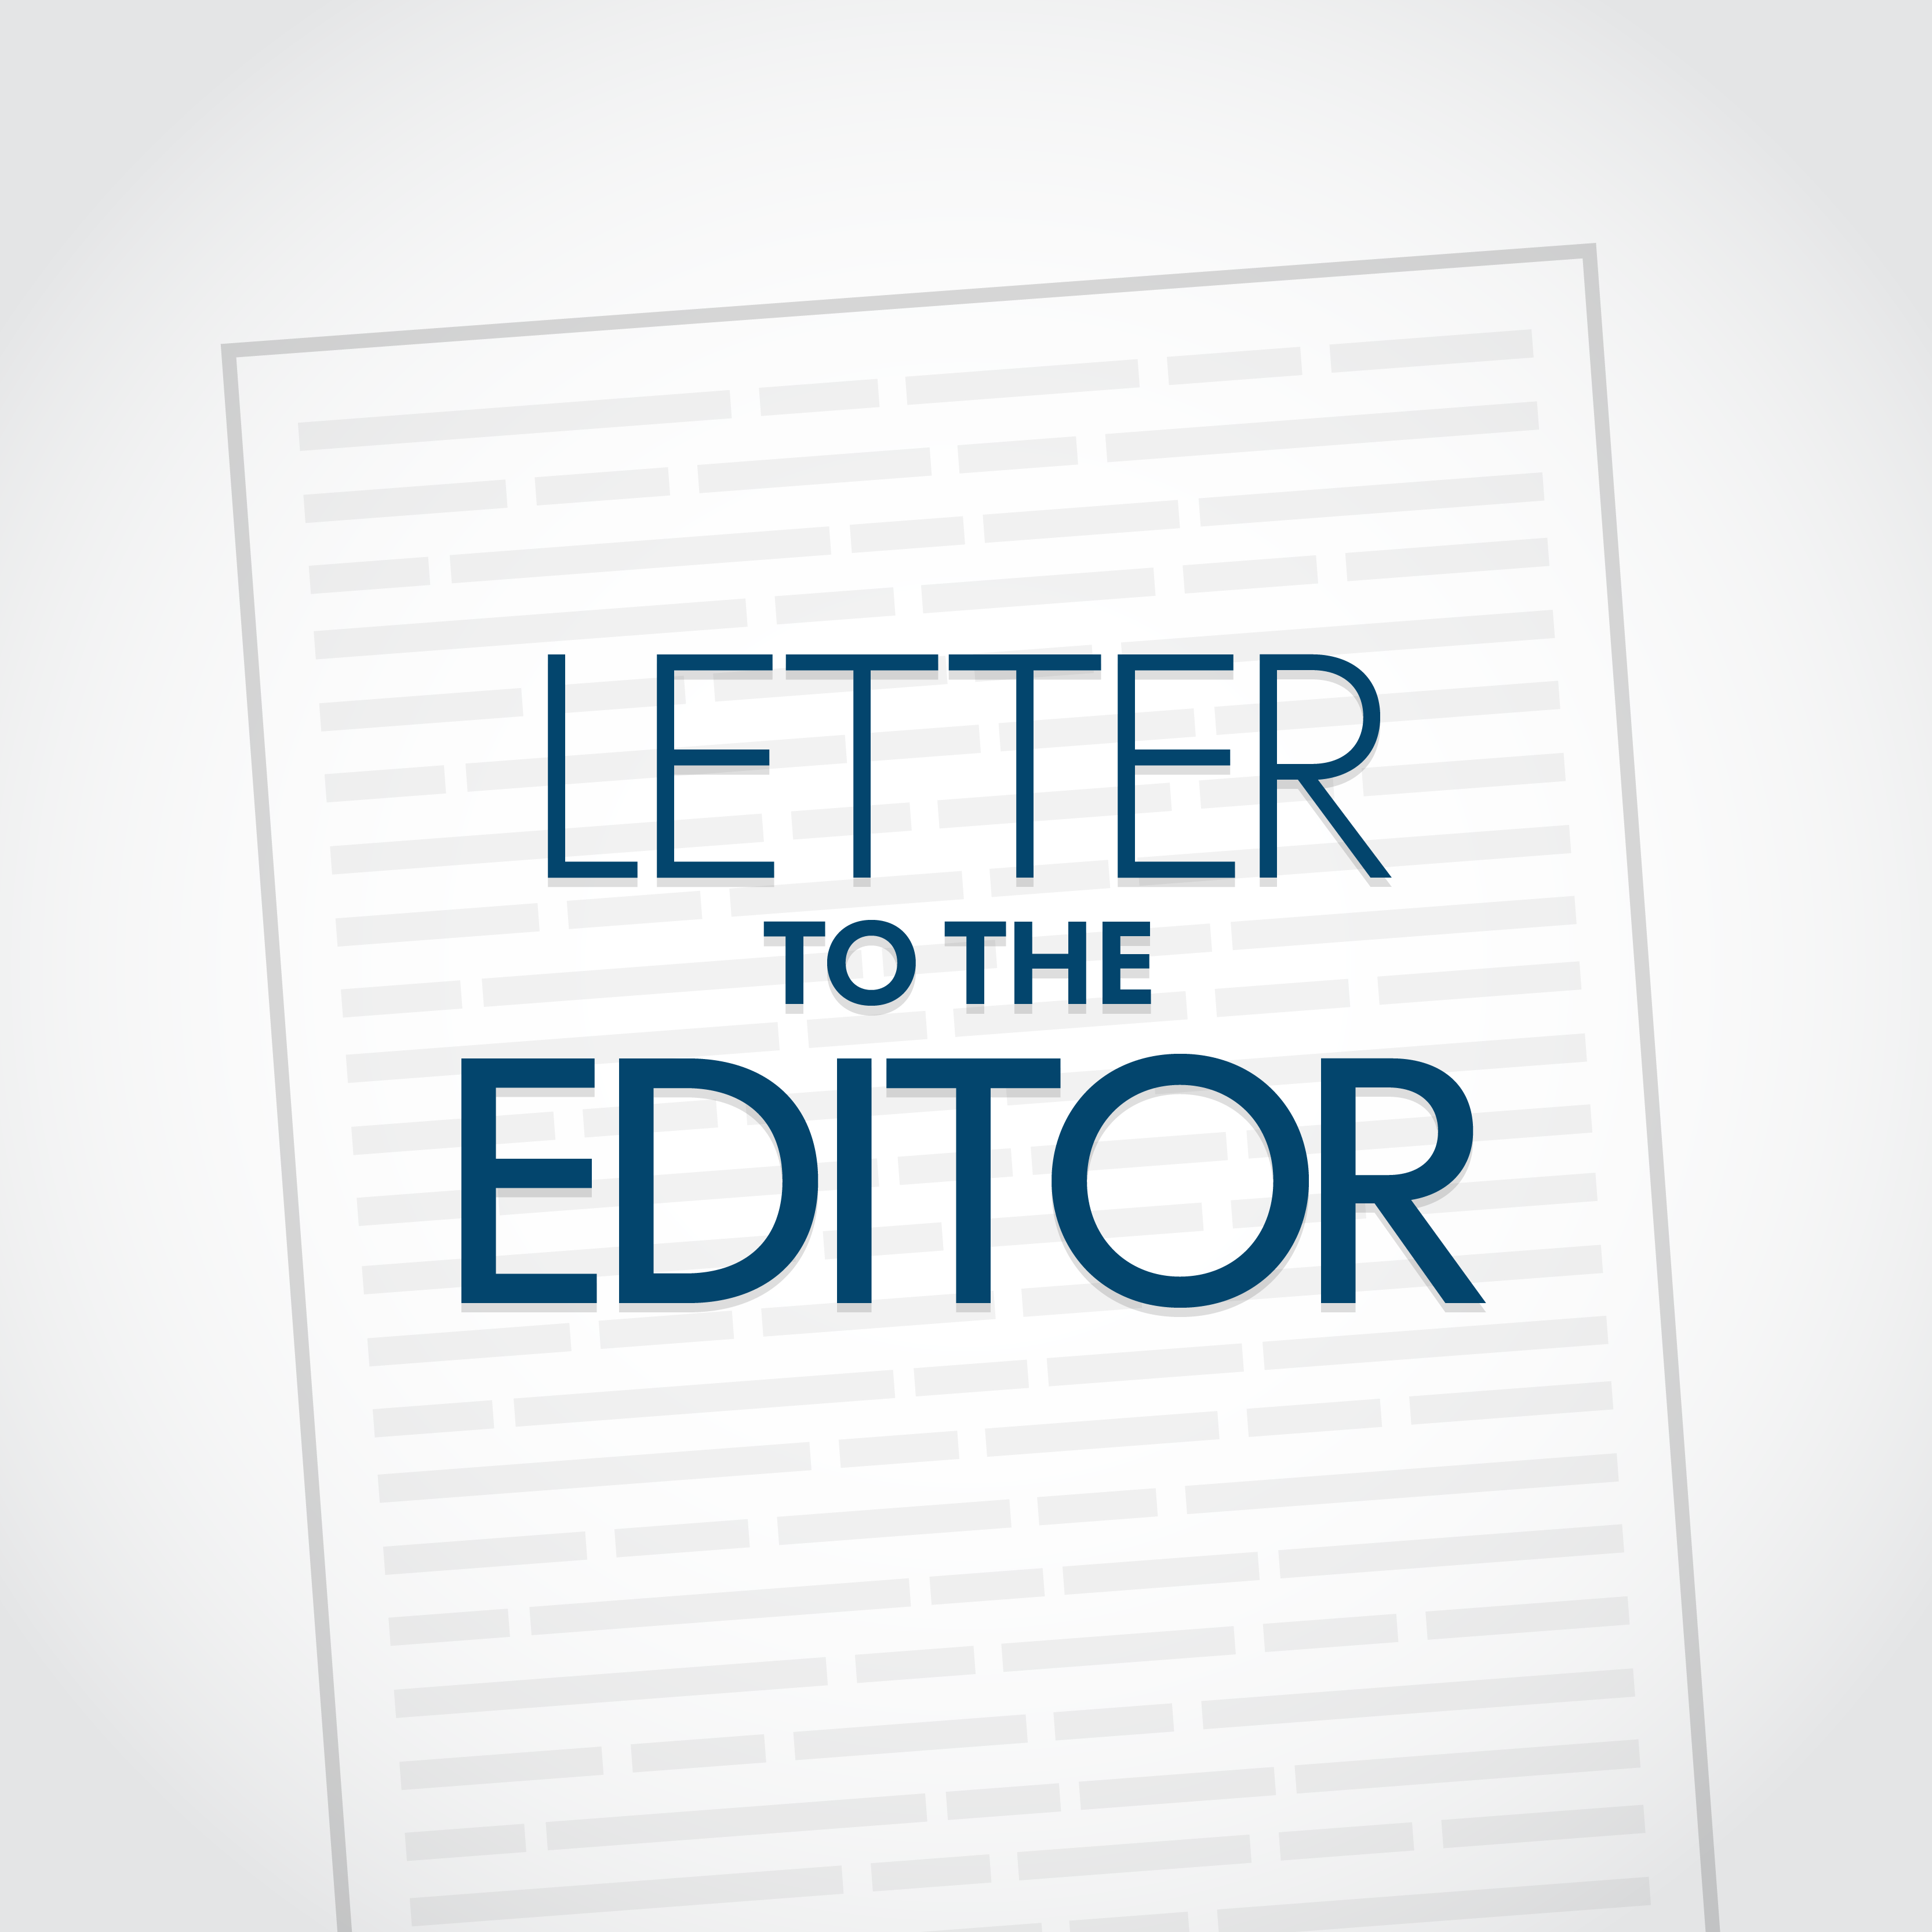 To the editor: Changes needed for women and mothers in prison